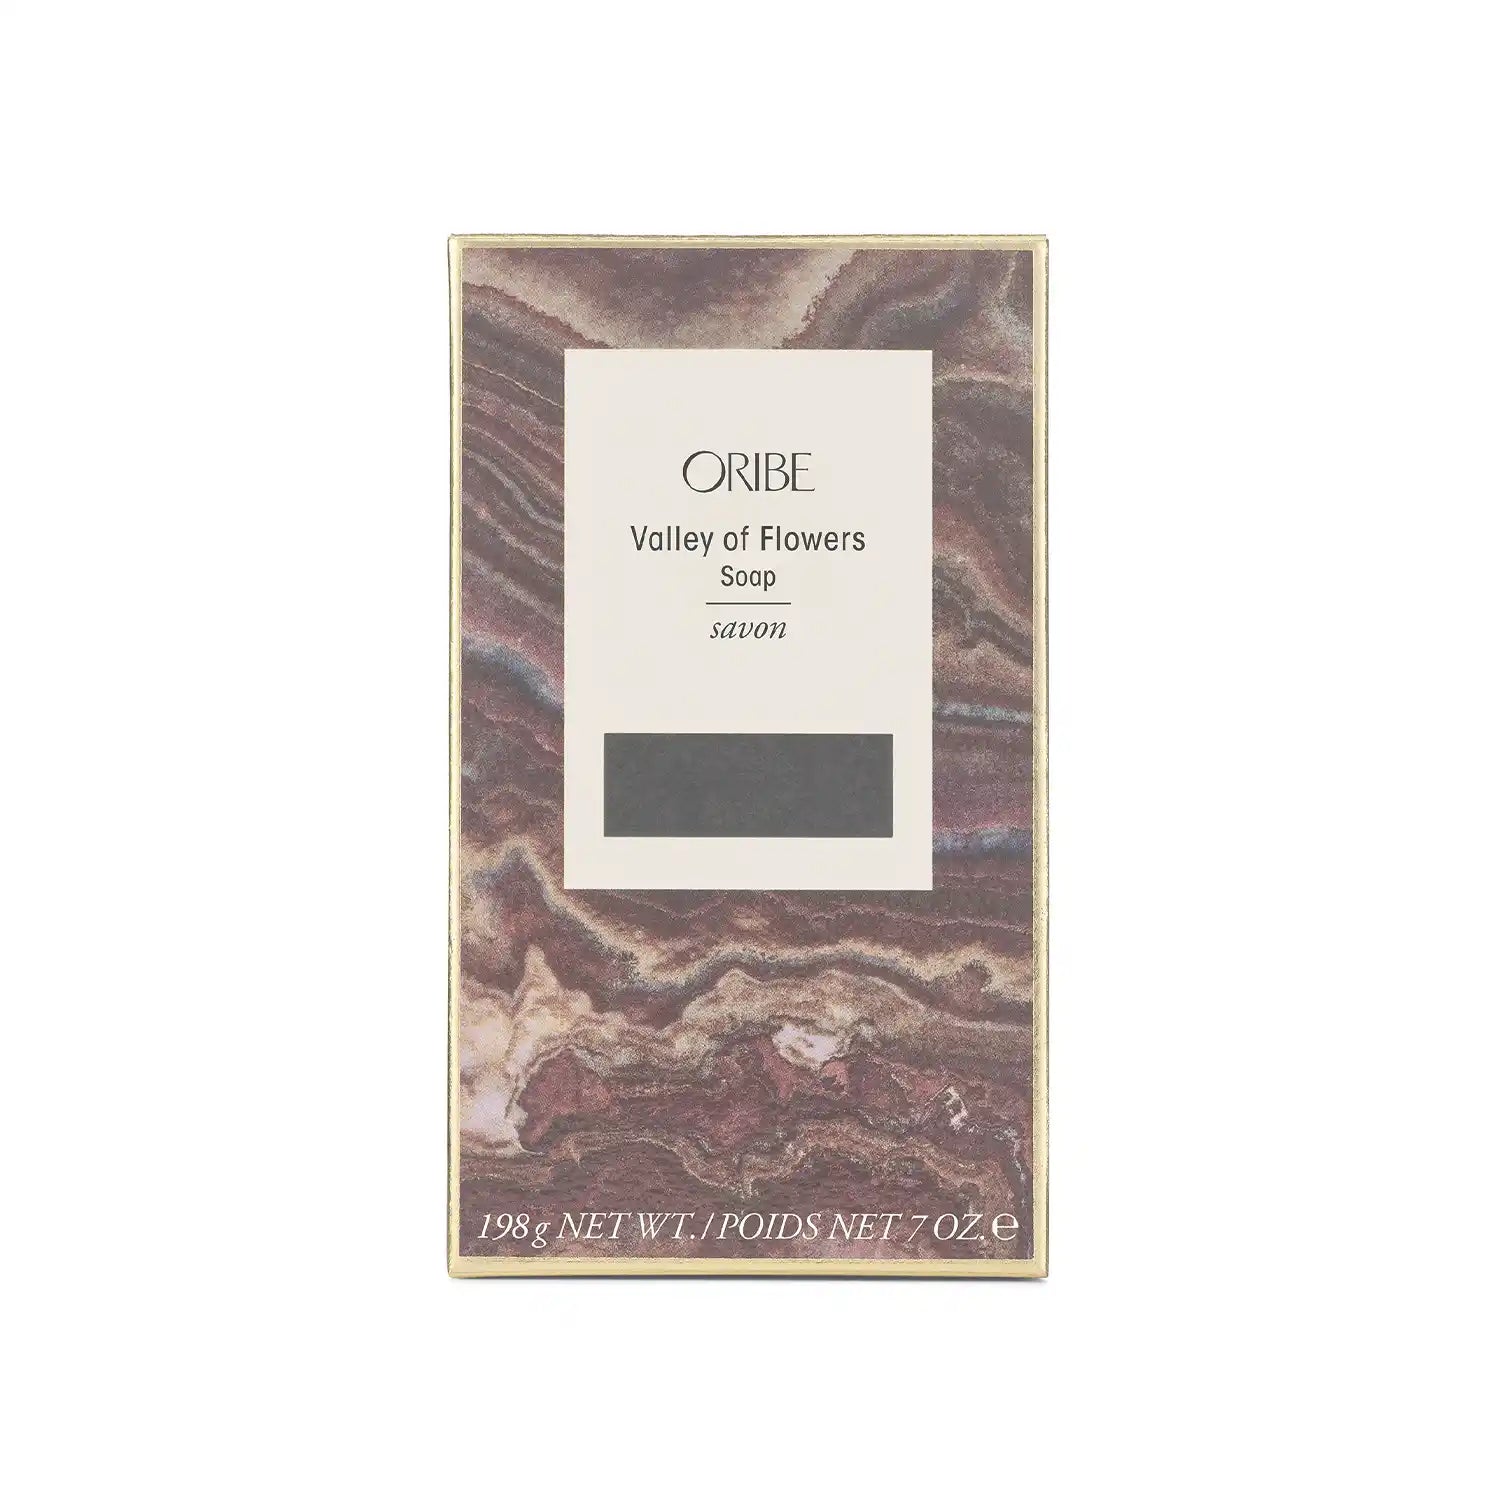 ORIBE - Valley of Flowers Soap (198g)